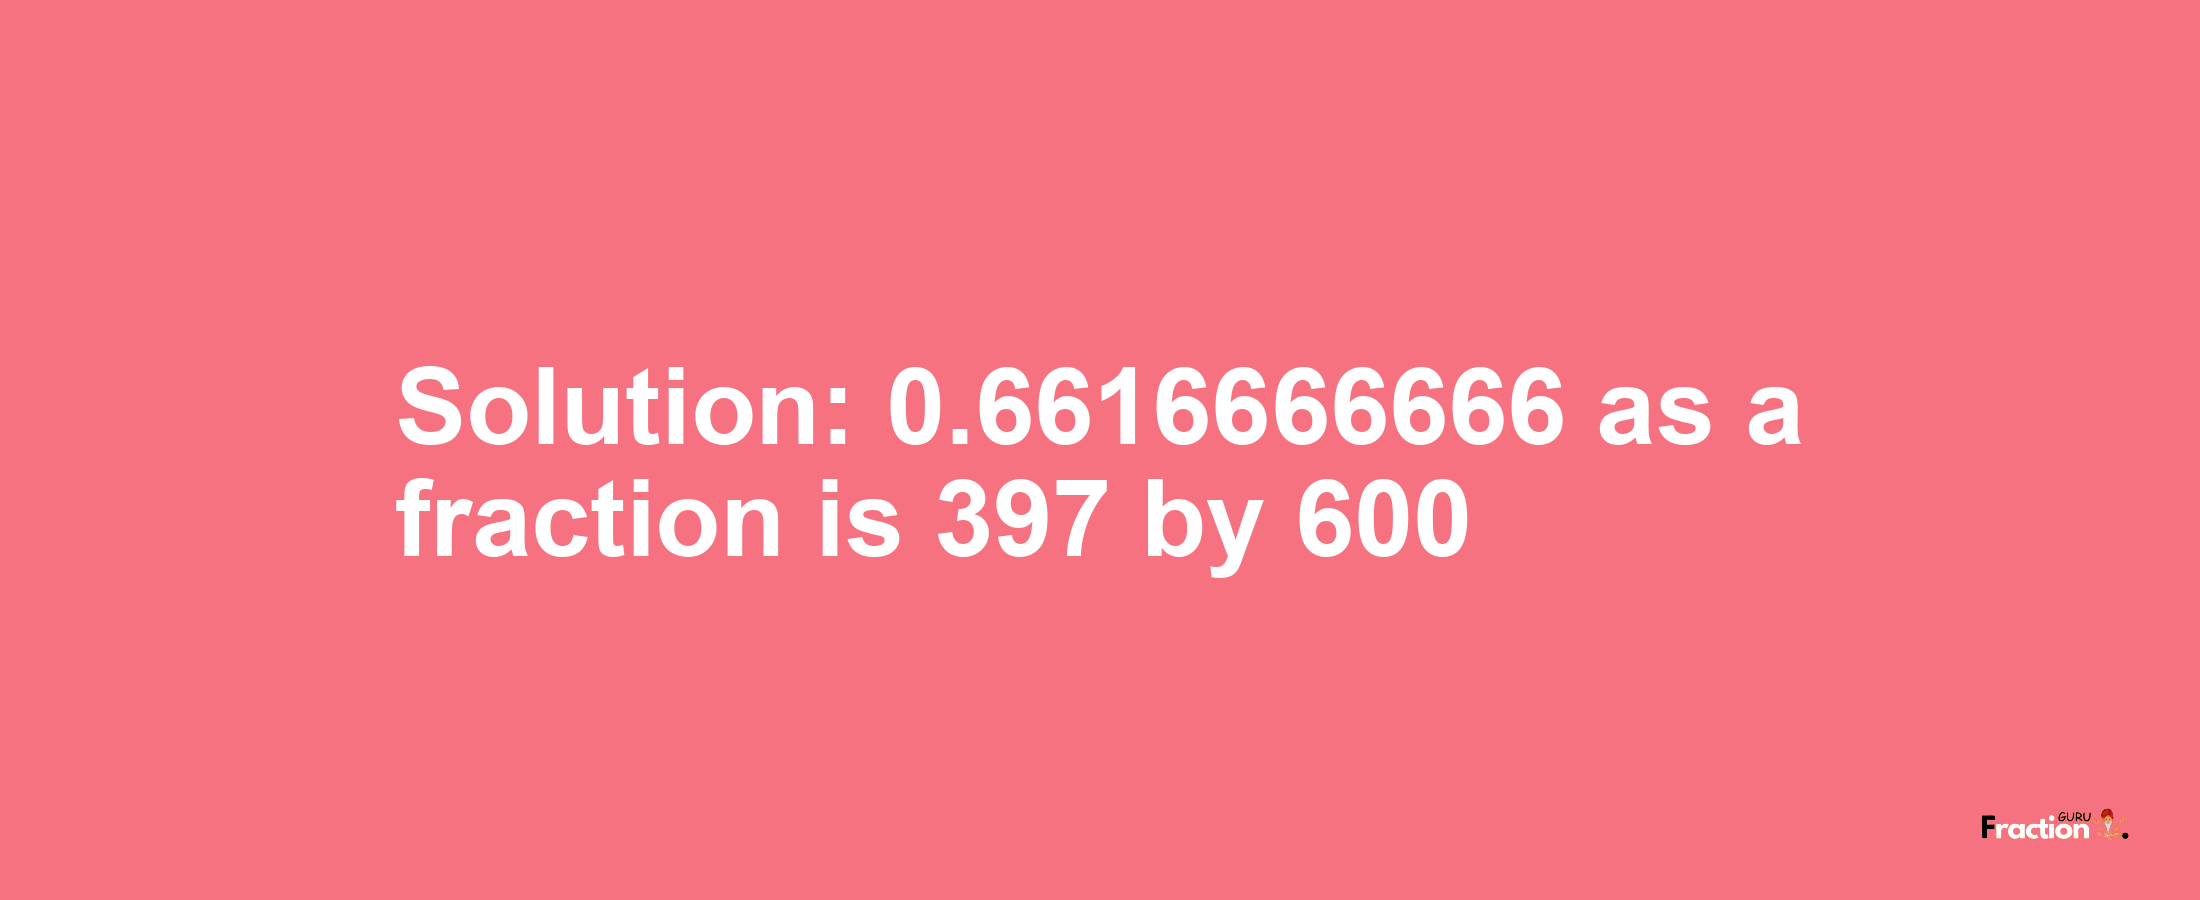 Solution:0.6616666666 as a fraction is 397/600